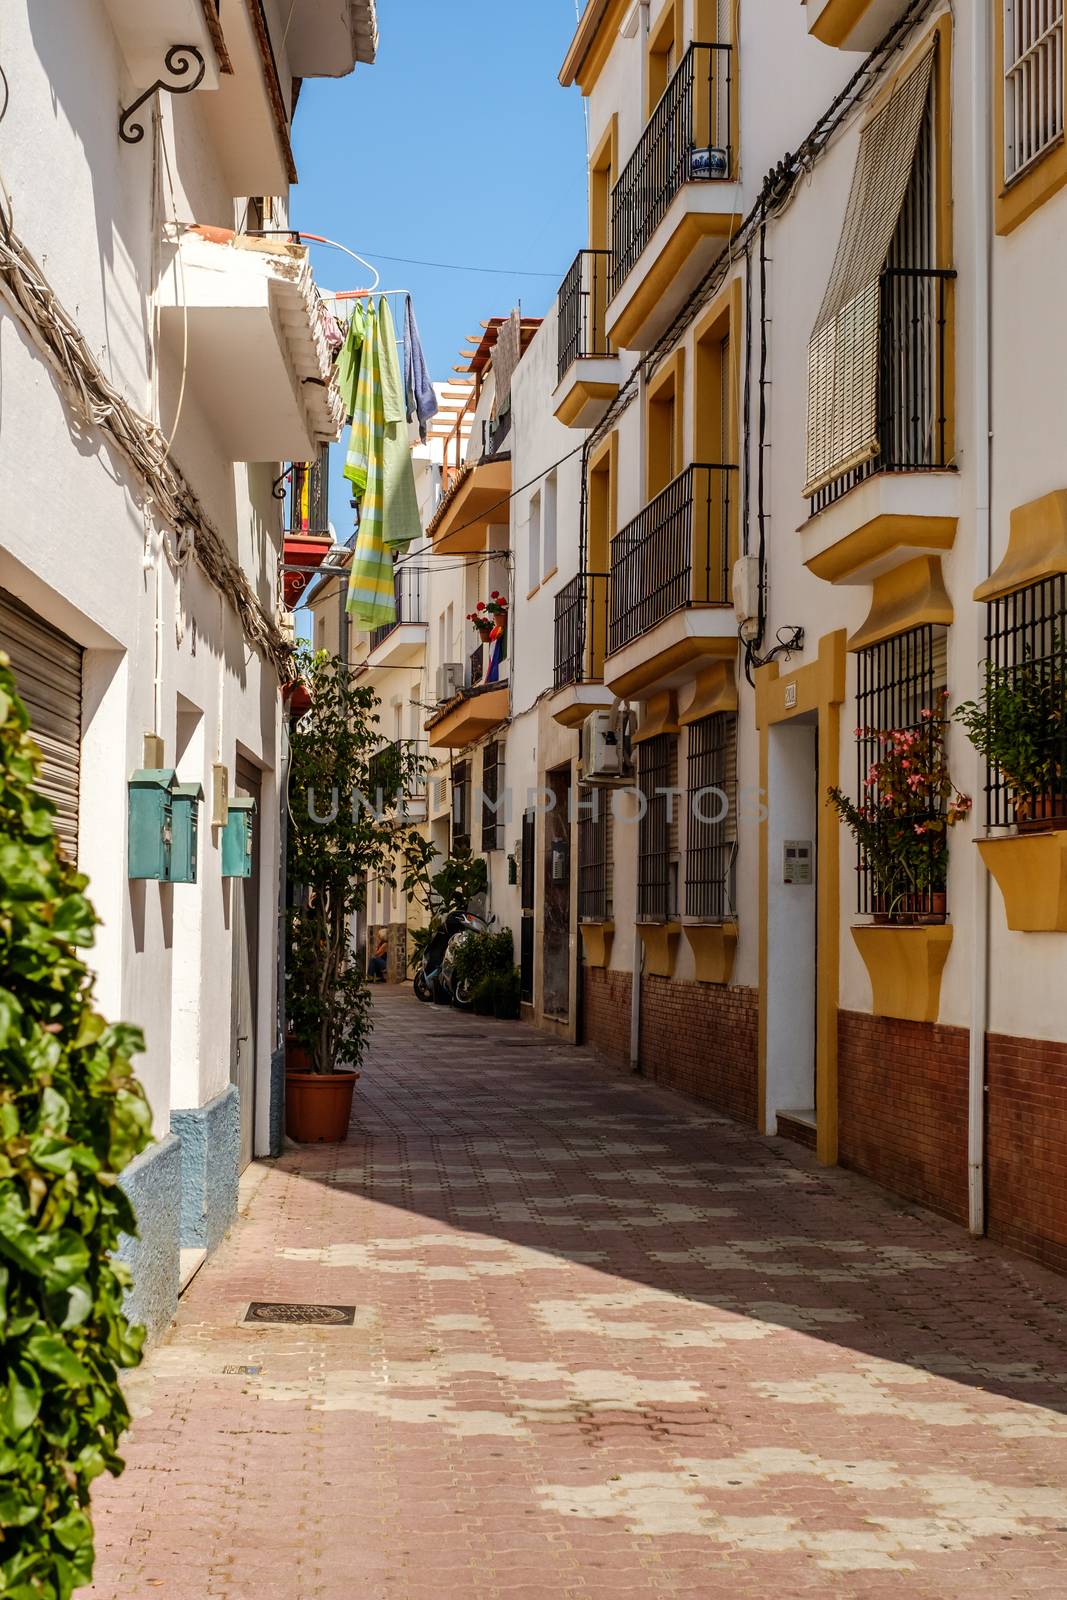 Marbella, Spain - June 27th, 2018. Typical old town street in Marbella, Costa del Sol, Andalusia, Spain, Europe